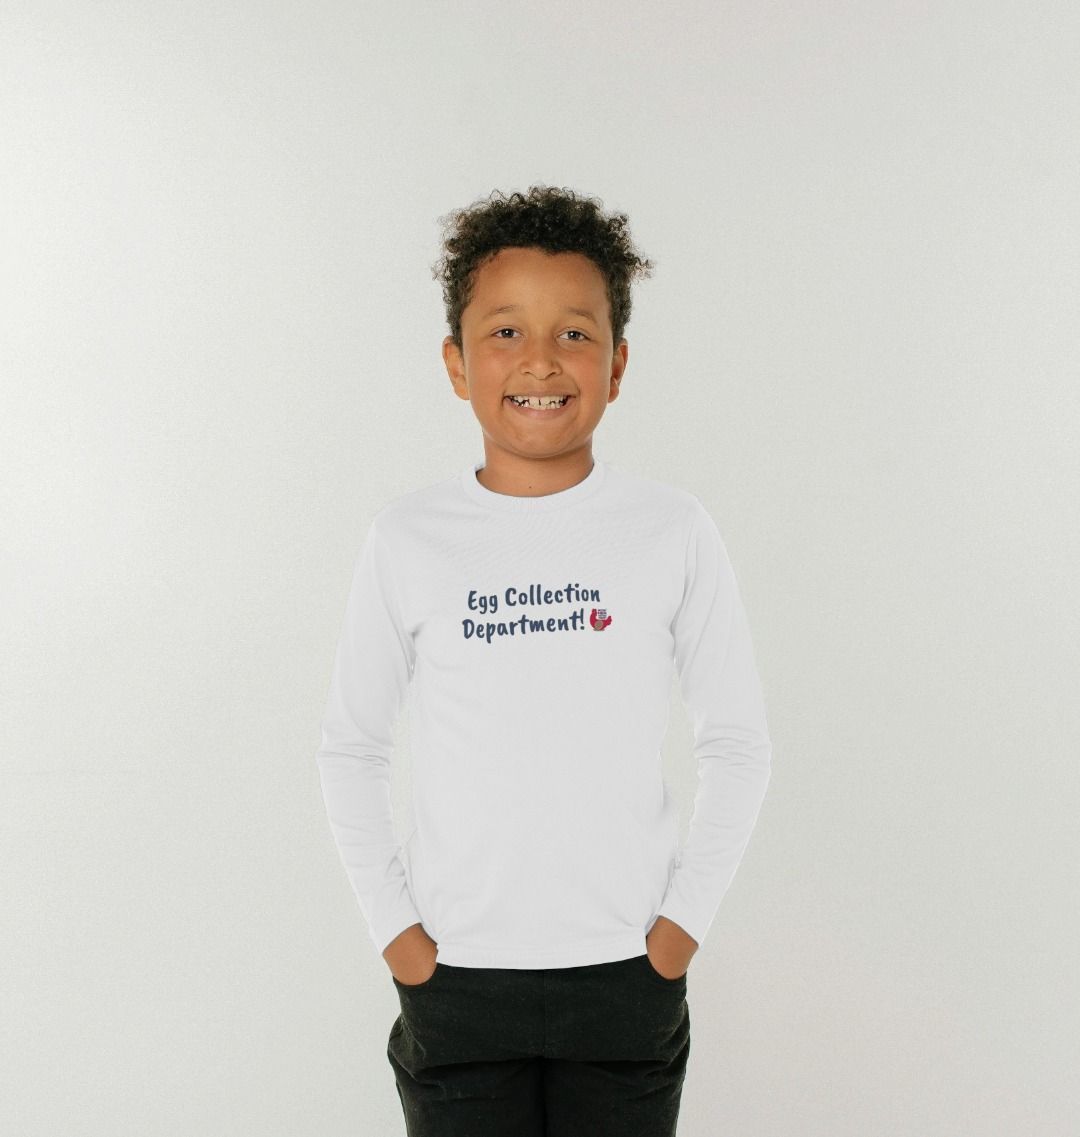 BHWT Egg Collection Department! Kids Unisex Long Sleeve T-Shirt